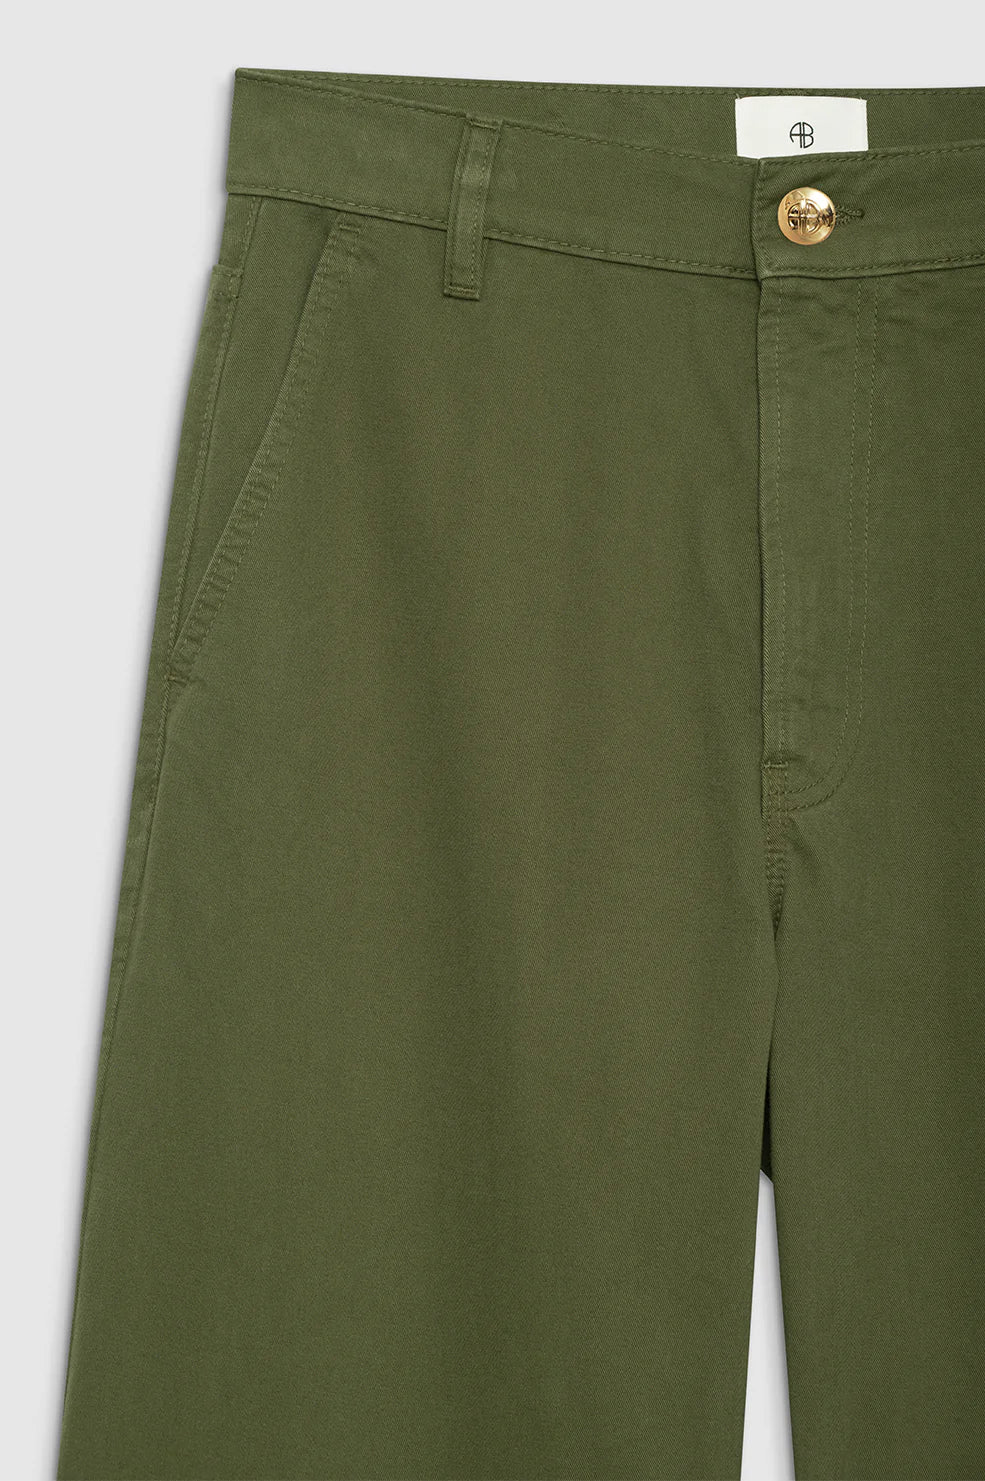 Briley Pant in Army Green